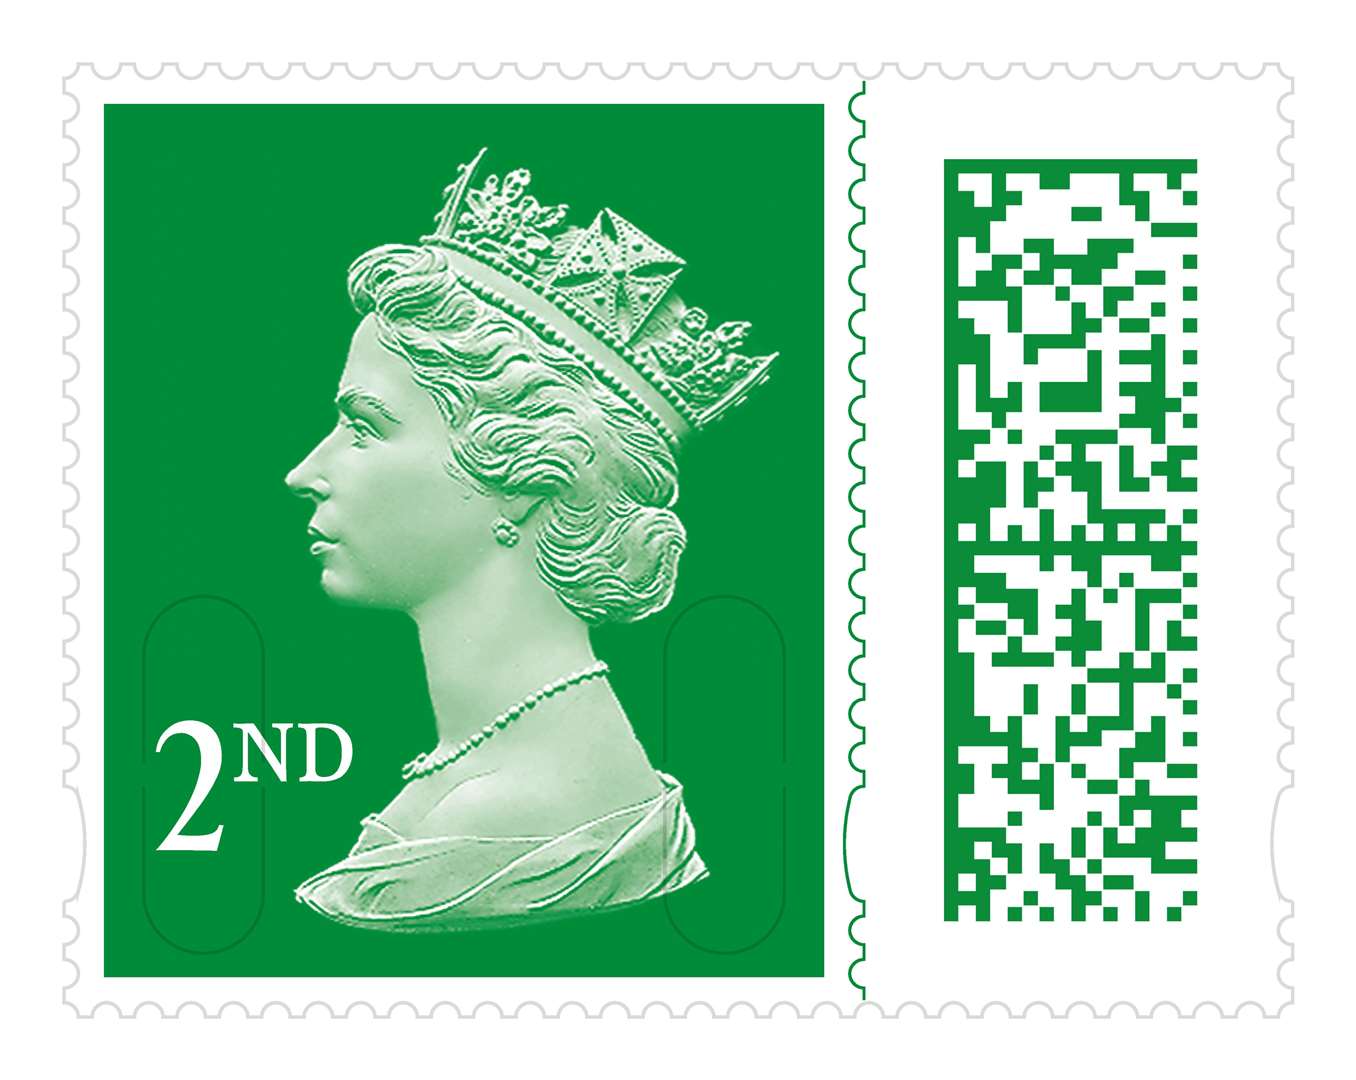 The digital barcode will match the colour of the stamp